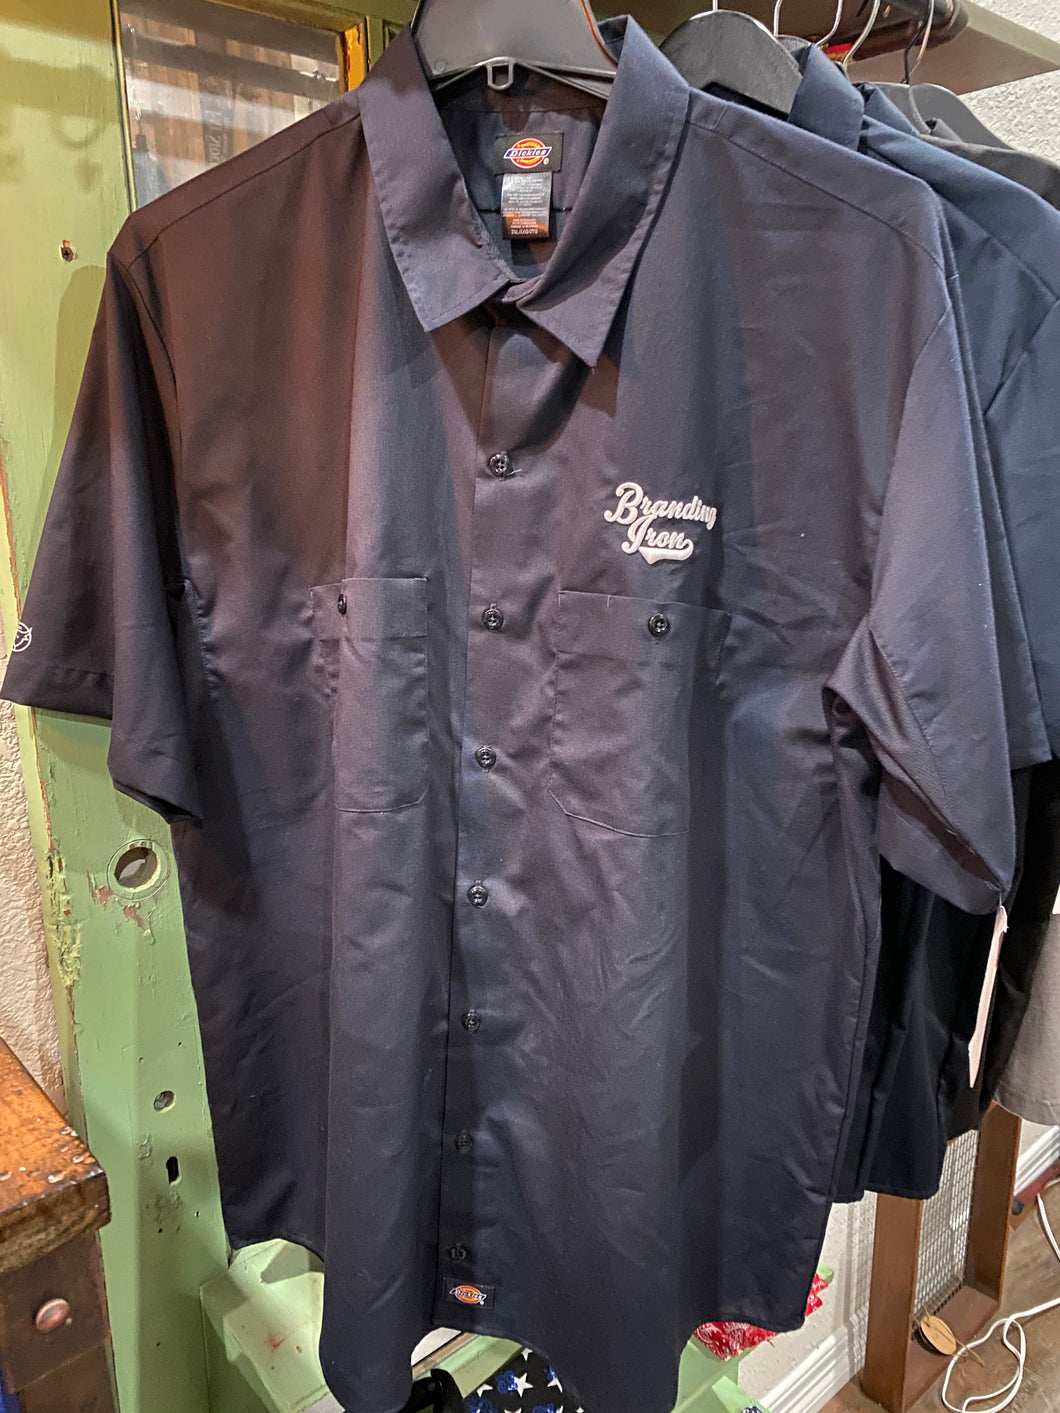 Branding Iron Club Button Up Dickie’s Work Shirts [2 Colors]